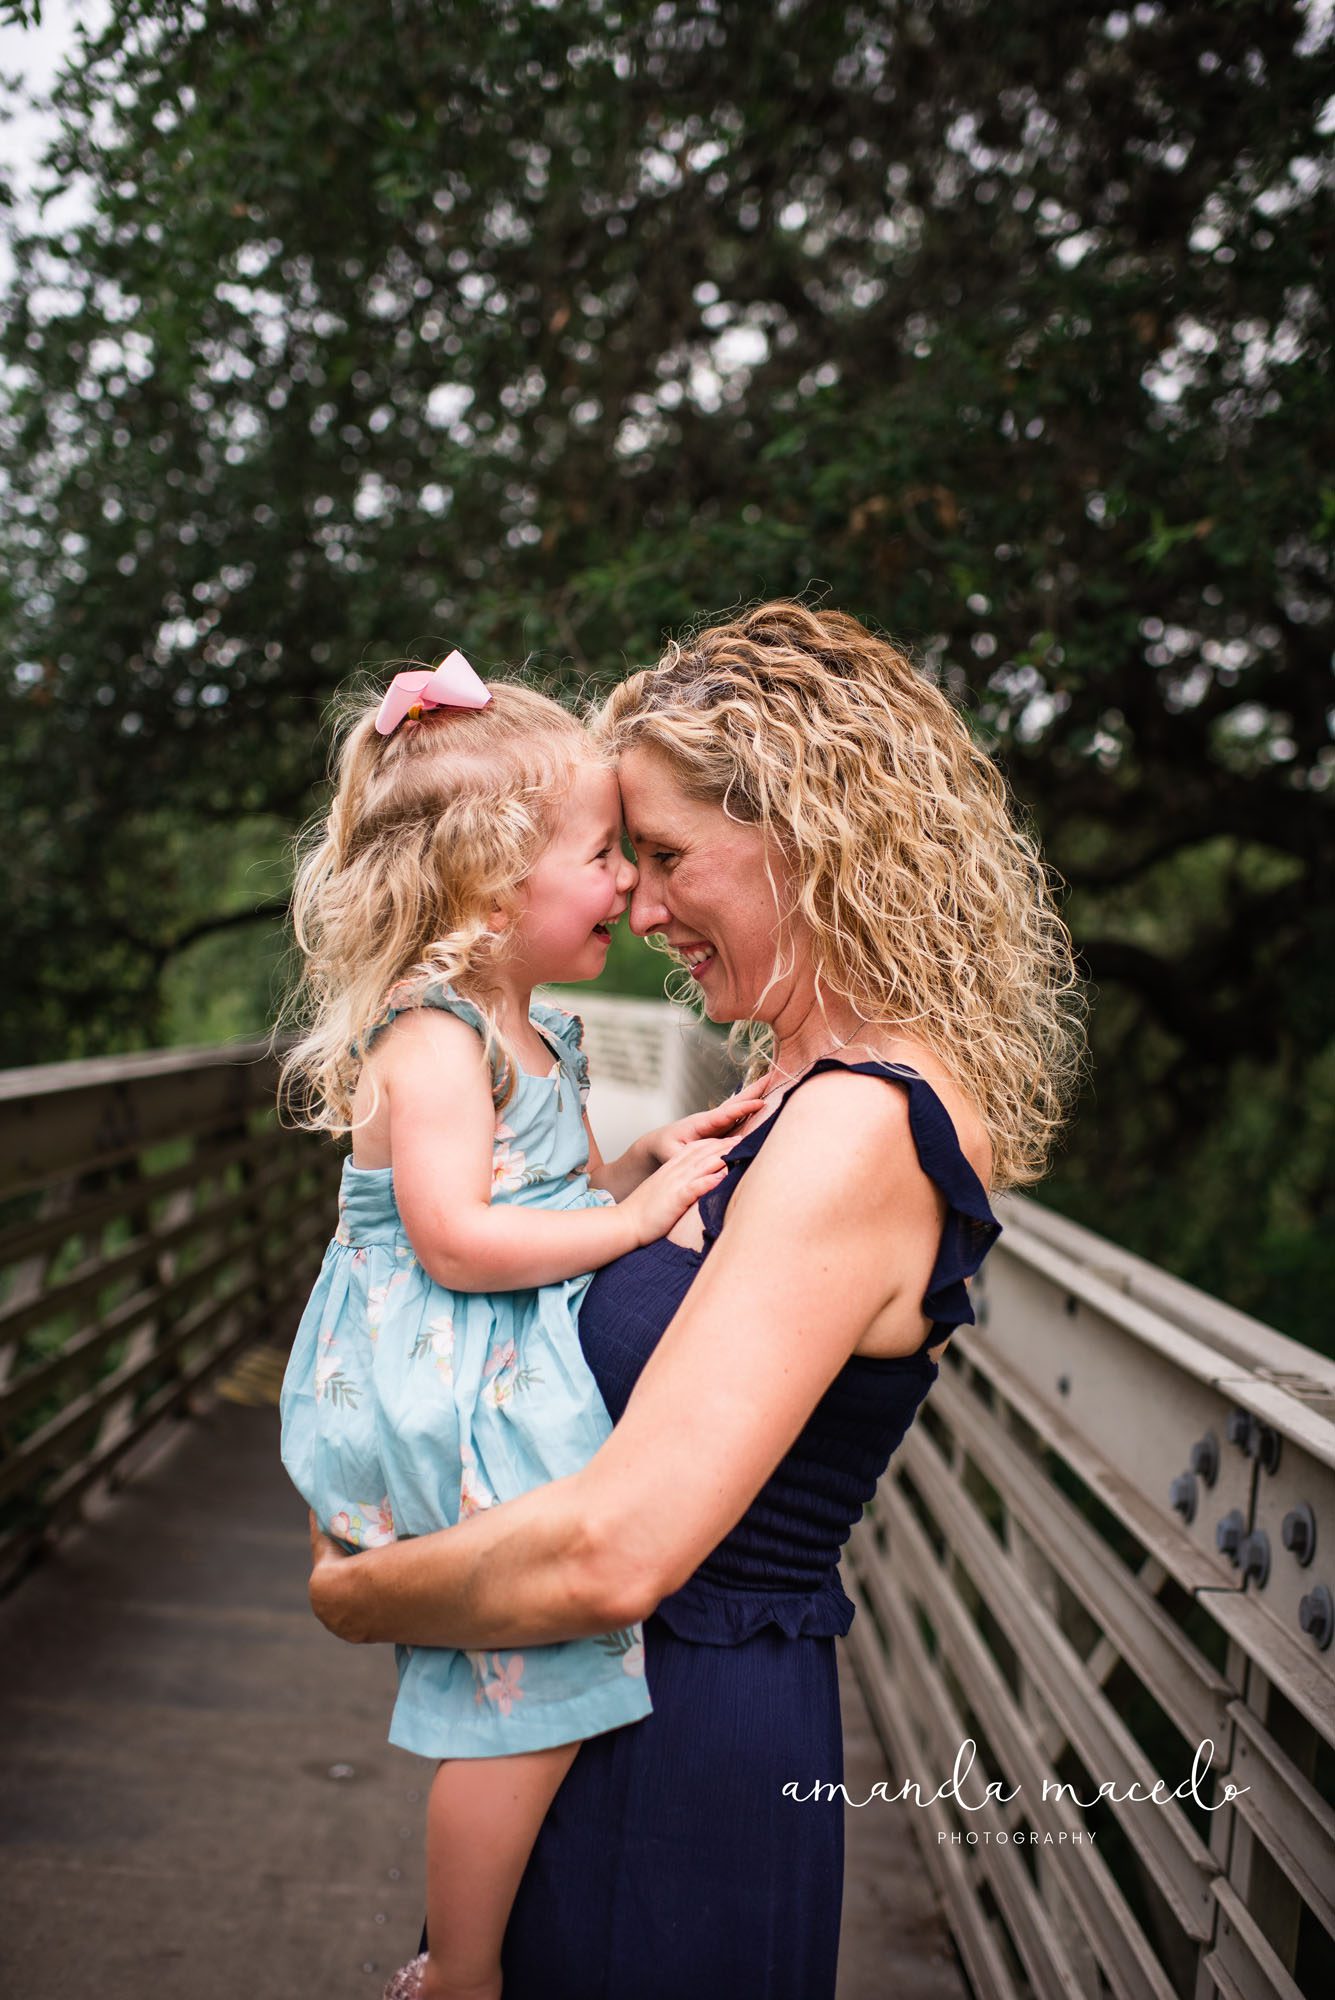 Family photographer, mom holding daughter close and smiling